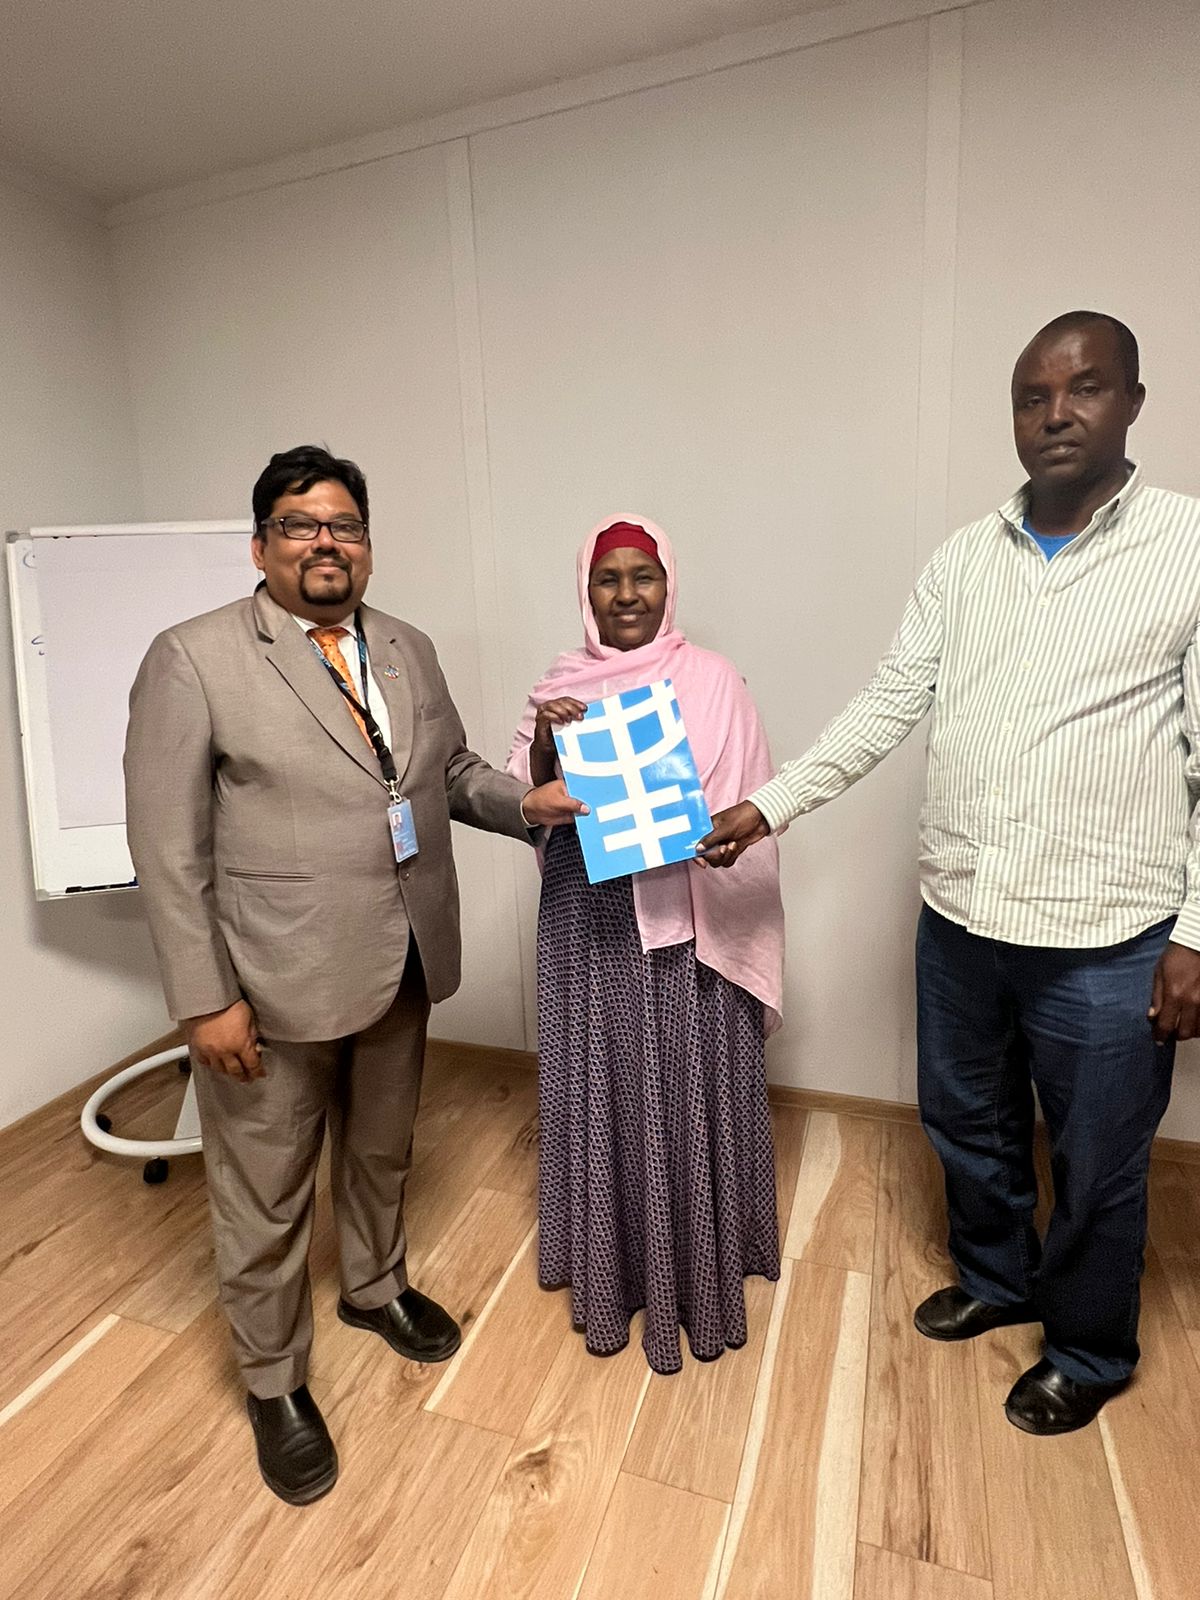 Dr. Syed Sadiq Head of Un Women Somalia (left) and the CSO RG Chairperson Ms Asha Siyad (Centre) and the Co-Chair Abdukarin Kulane (right)Photo by Mohamed